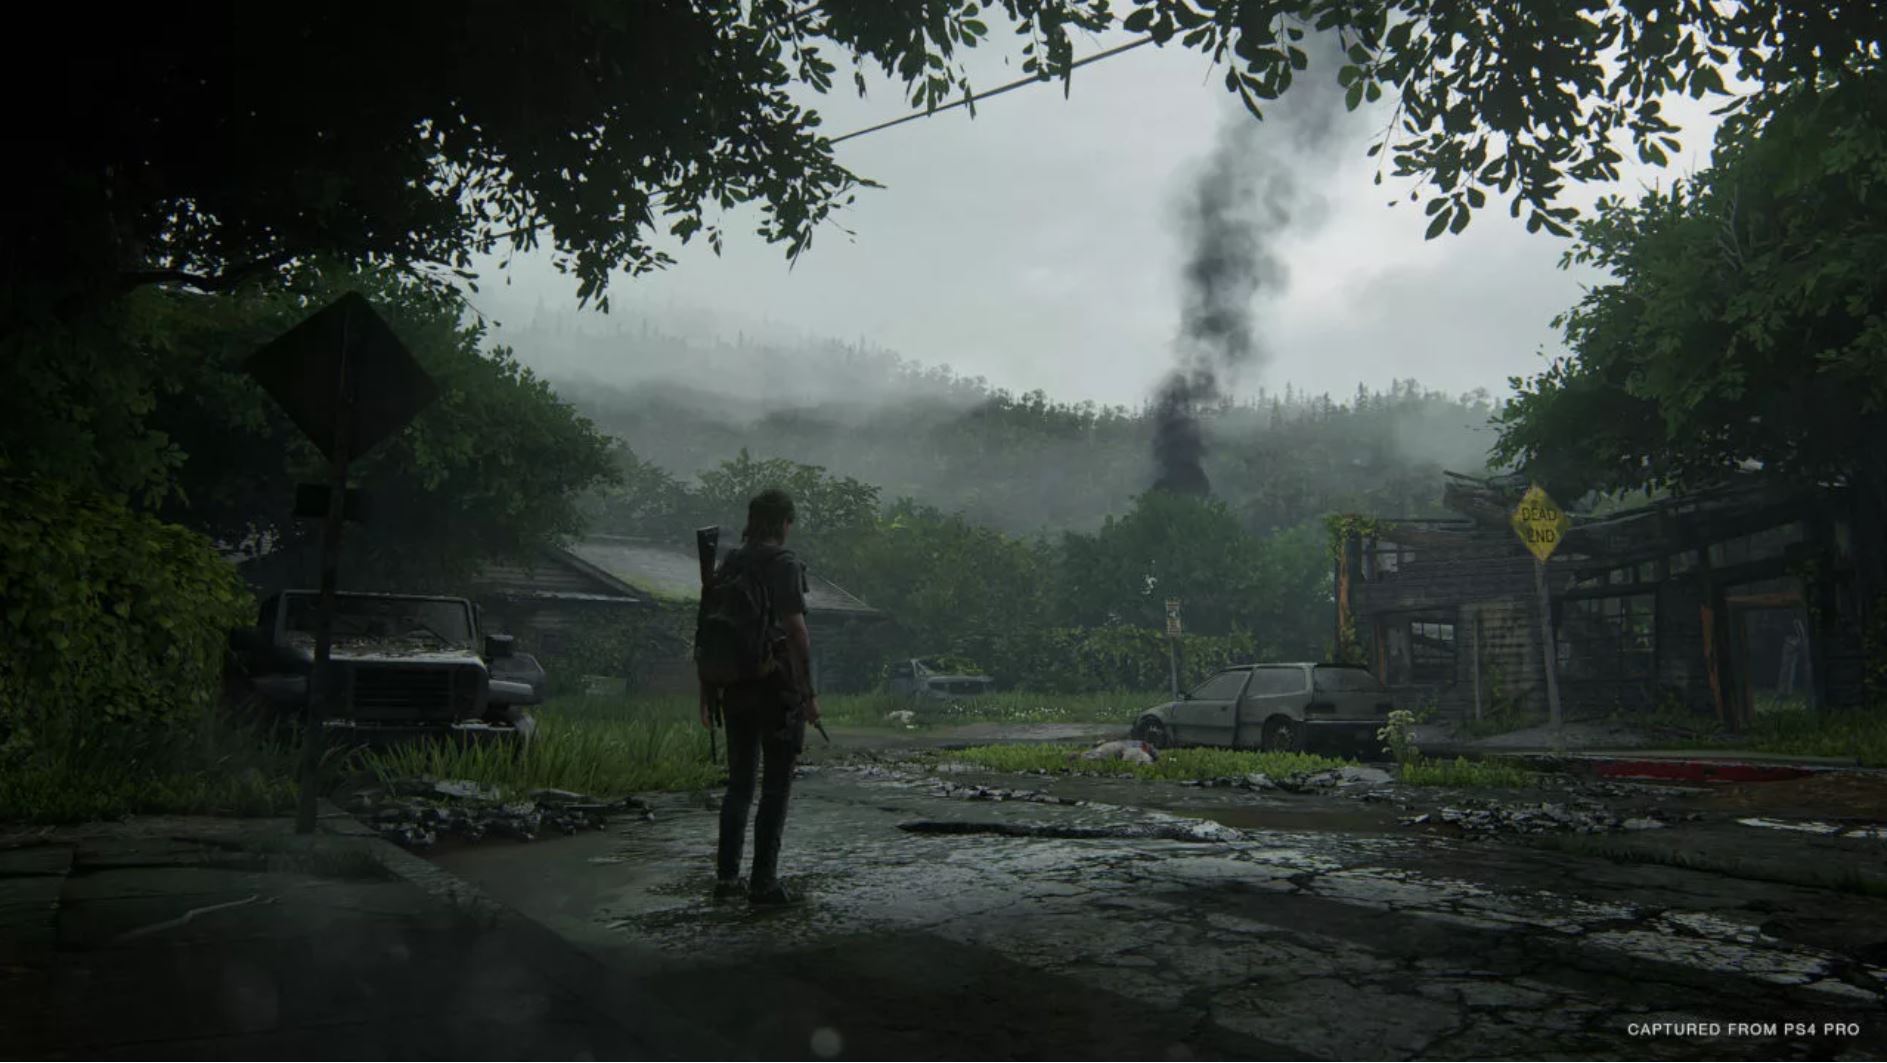 New Release Dates Announced For The Last of Us Part II and Ghost of Tsushima